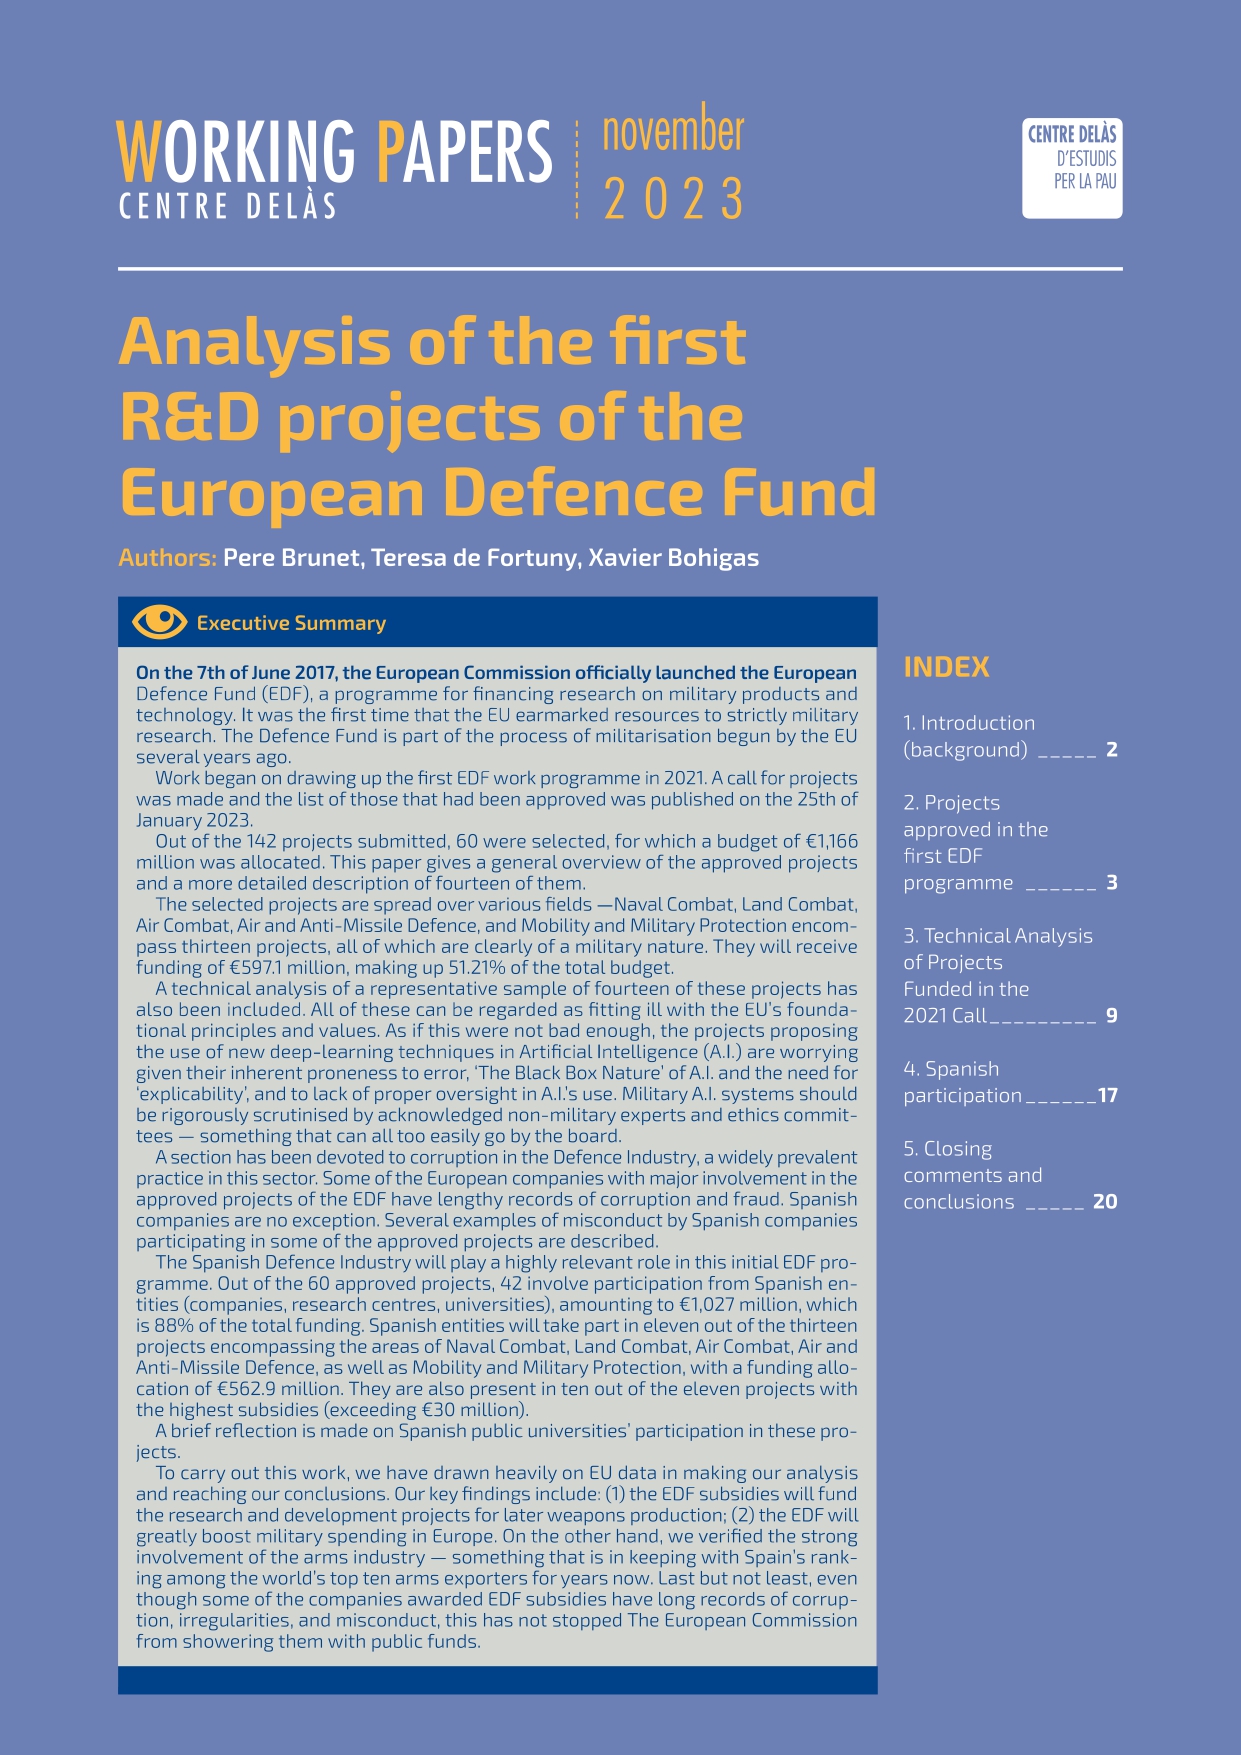 Working Paper “Analysis of the first R&D projects of the European Defence Fund”